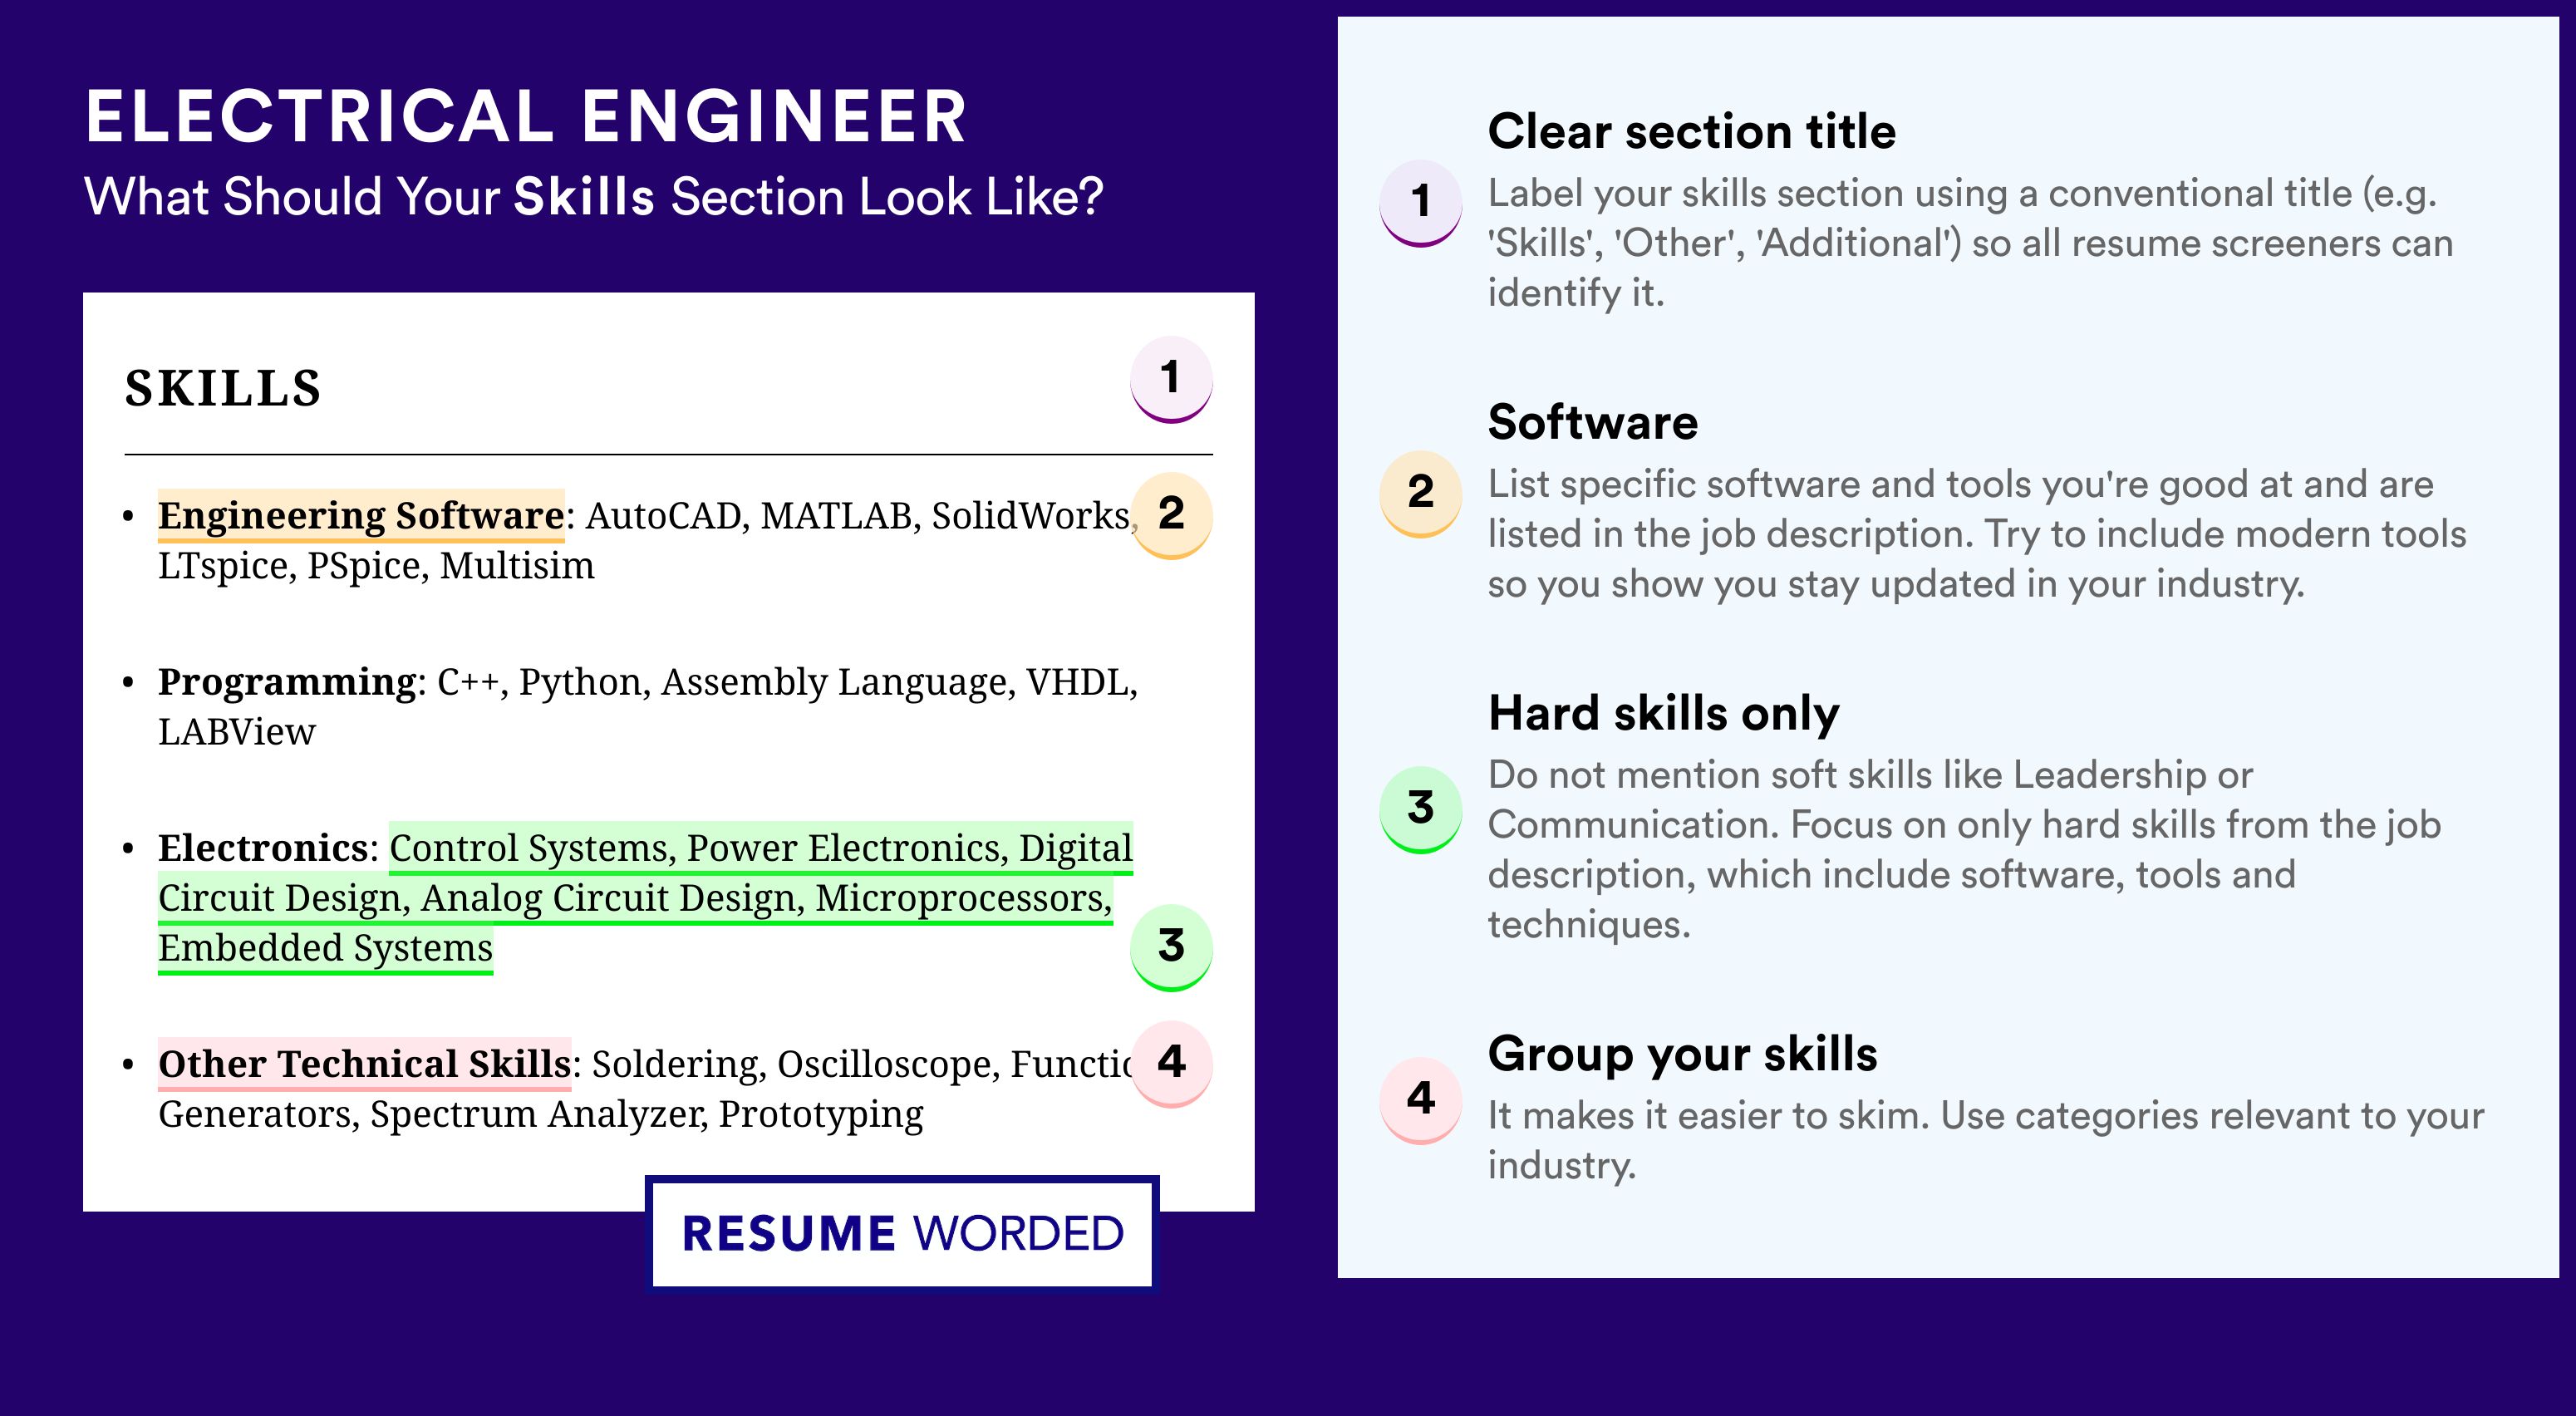 How To Write Your Skills Section - Electrical Engineer Roles